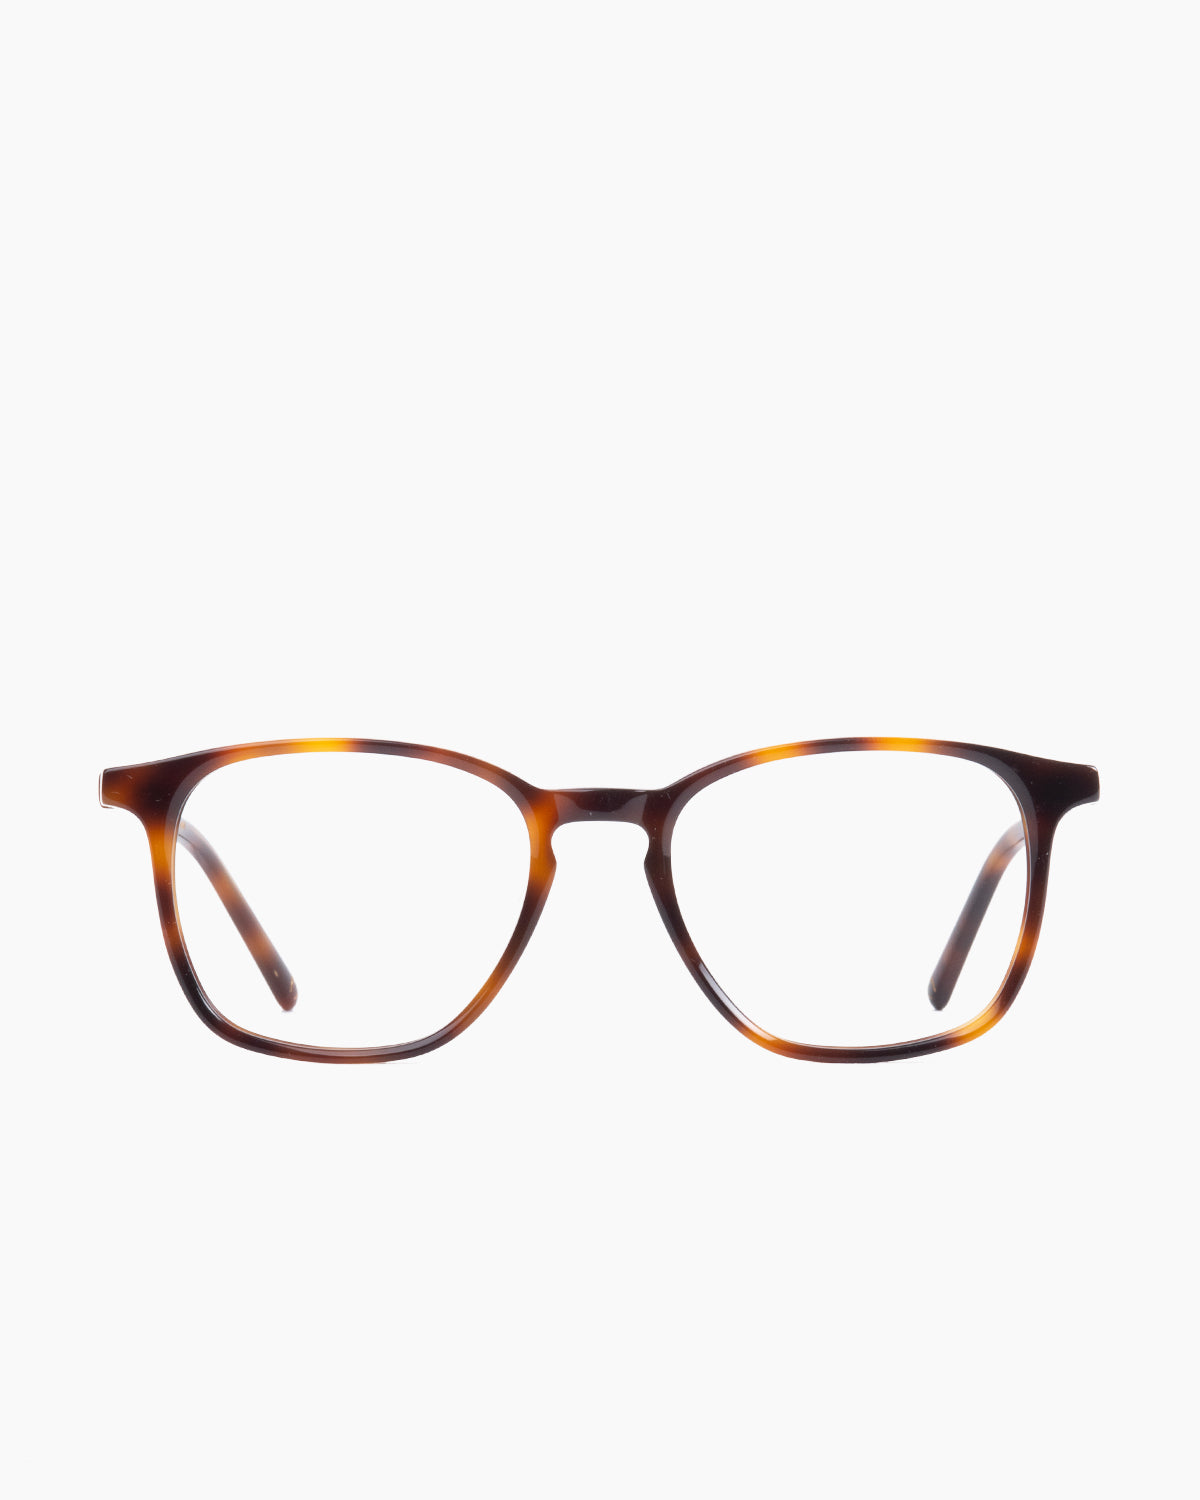 Spectacleeyeworks - JF - 505 | glasses bar:  Marie-Sophie Dion